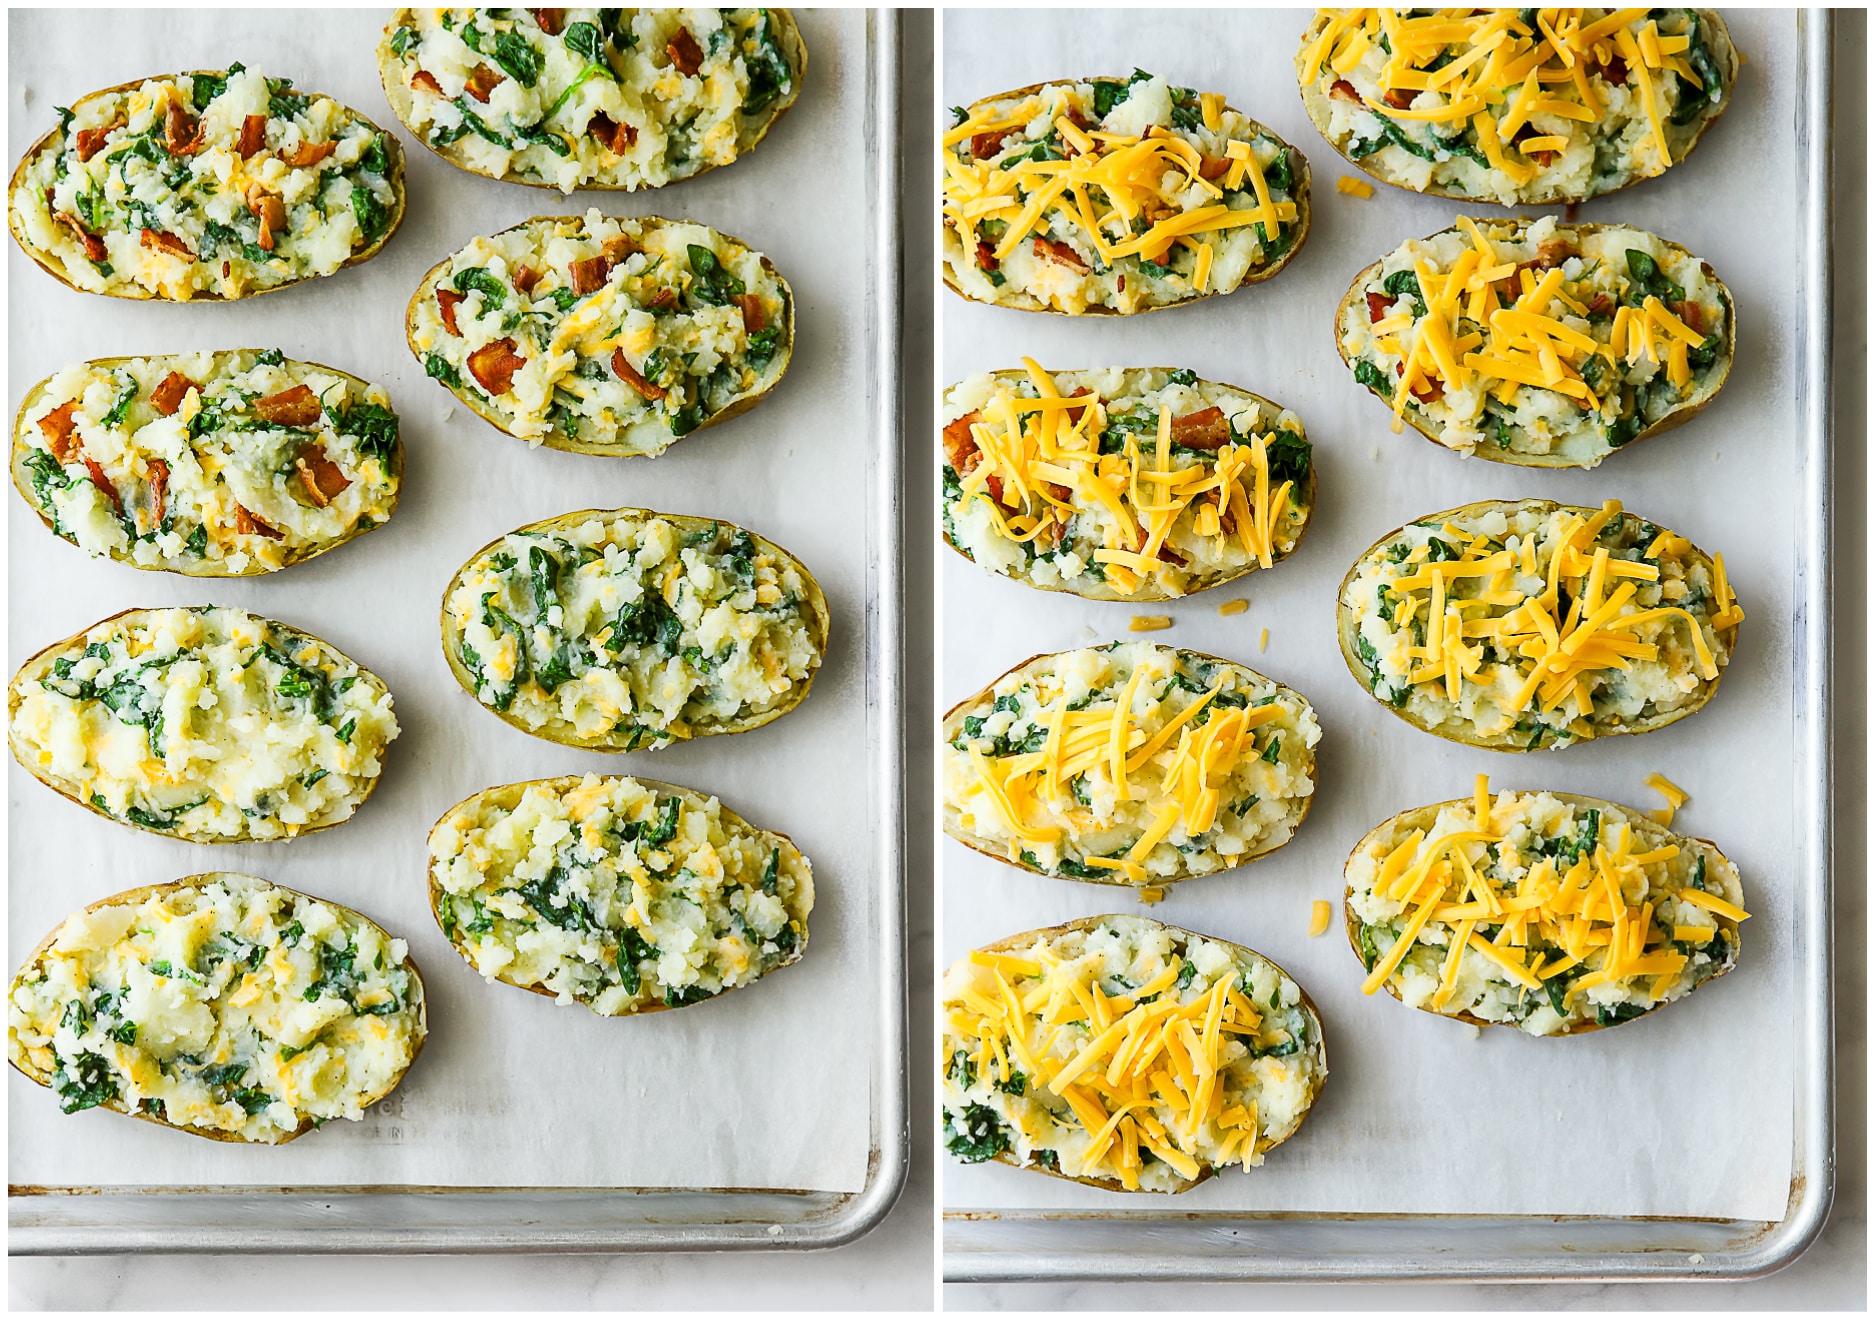 filled potato skins with and without cheese topping